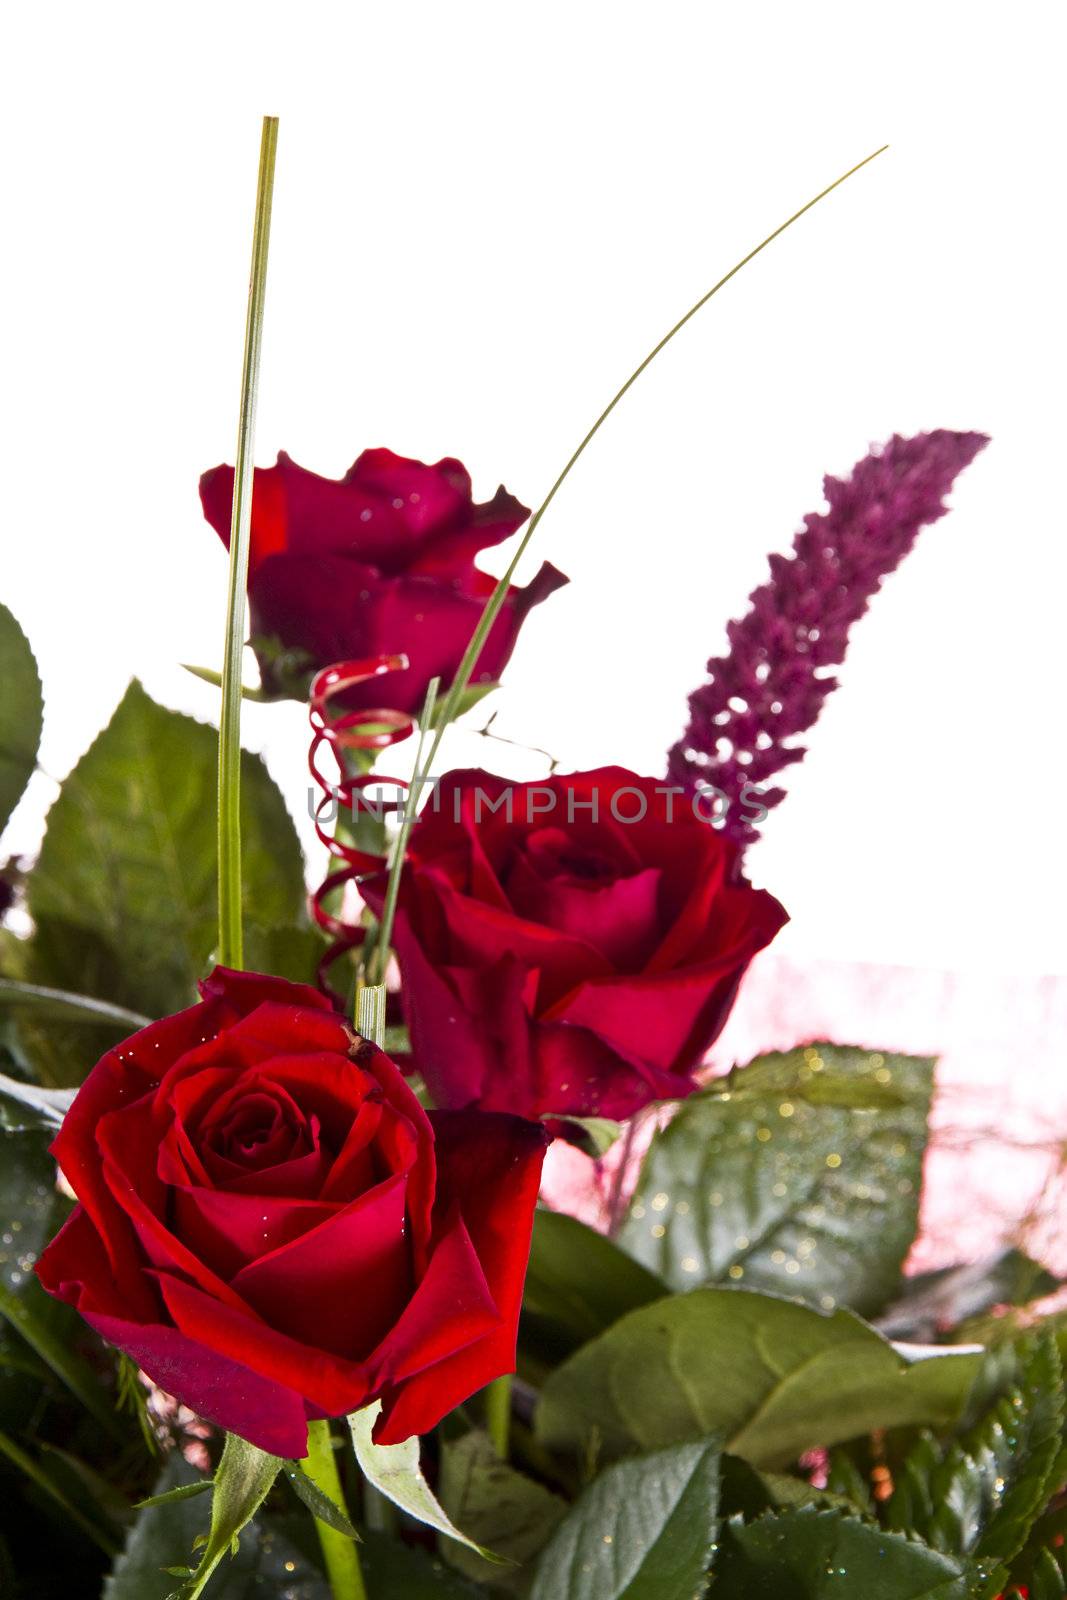 Bouquet of red roses isolatet on white background